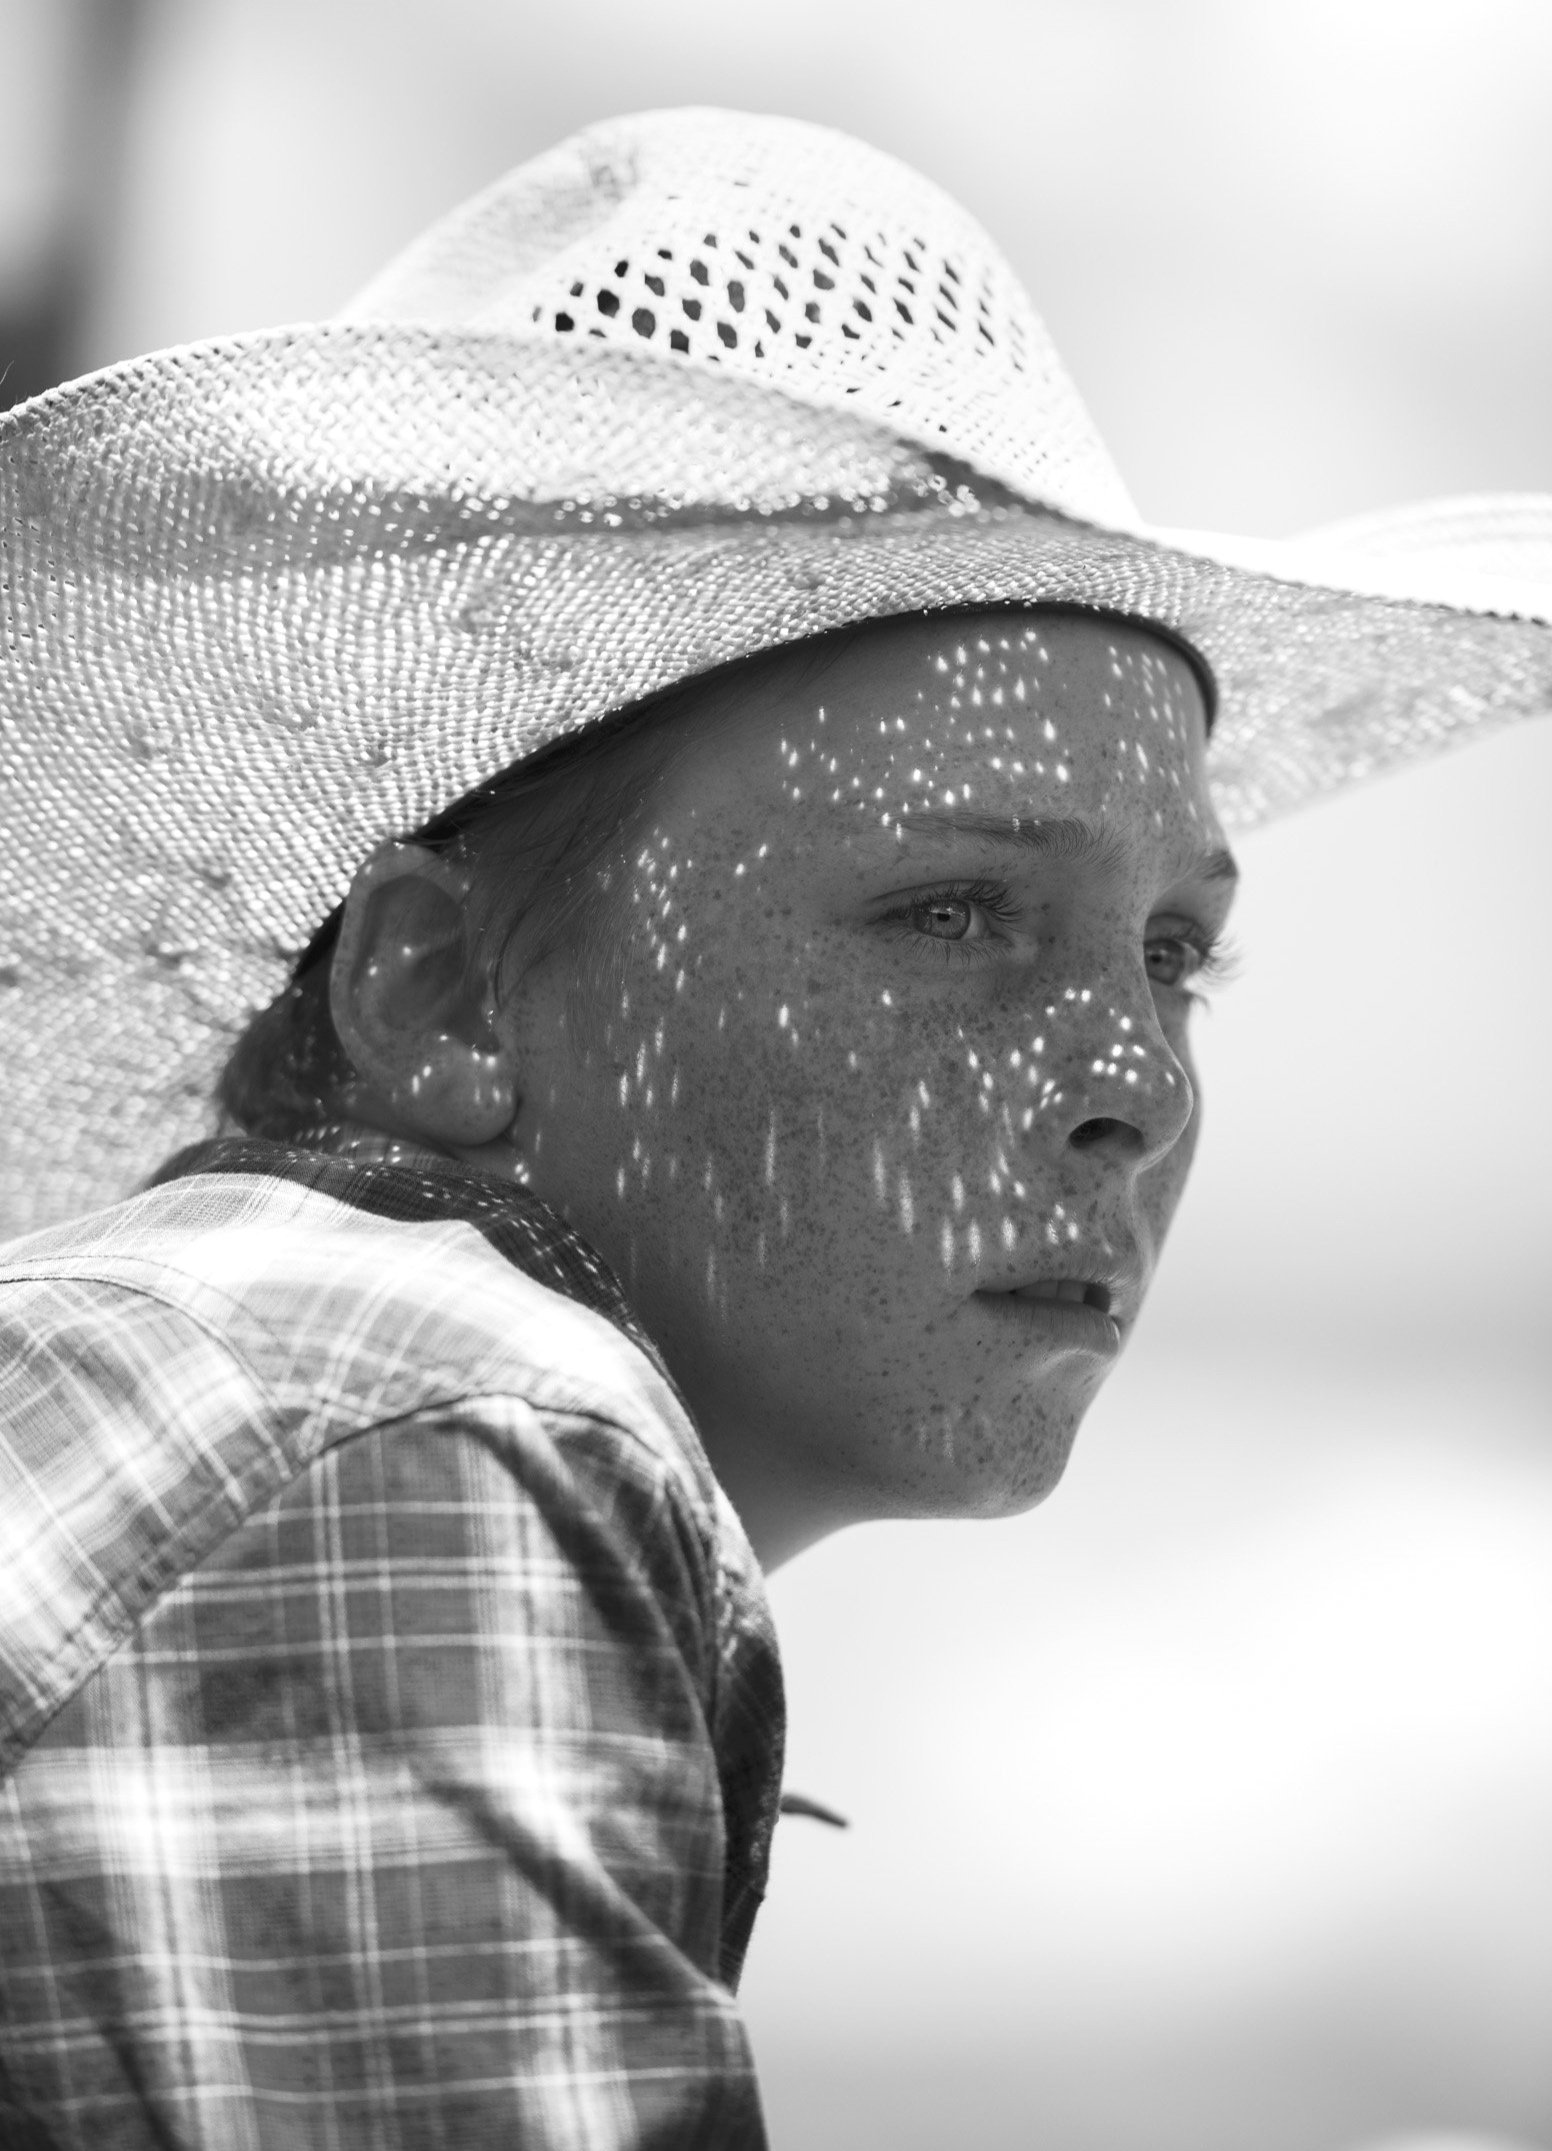  A local cowboy watches The Maverick Club rodeo in Cimarron, N.M. on July 4, 2021. The event is the longest running open rodeo in the west.  